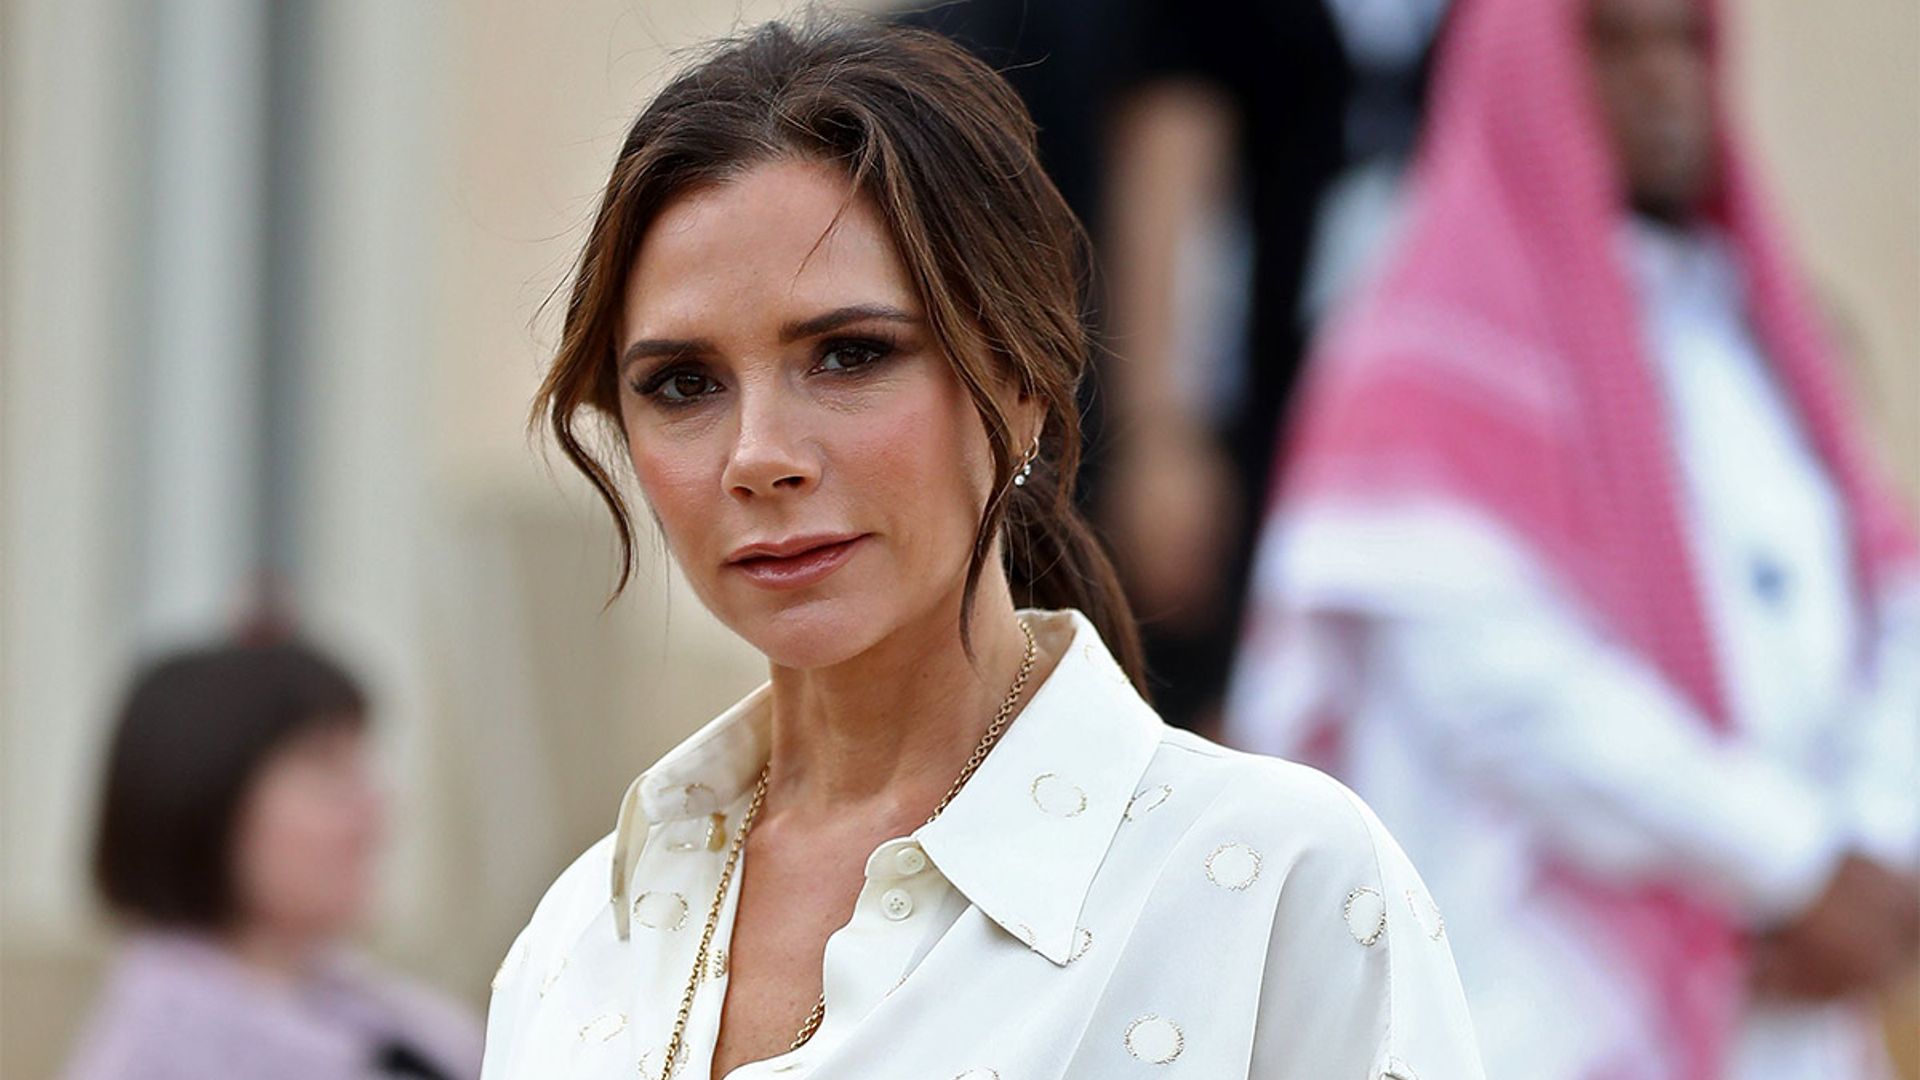 Victoria Beckham's latest outfit will really surprise you as it's VERY unexpected